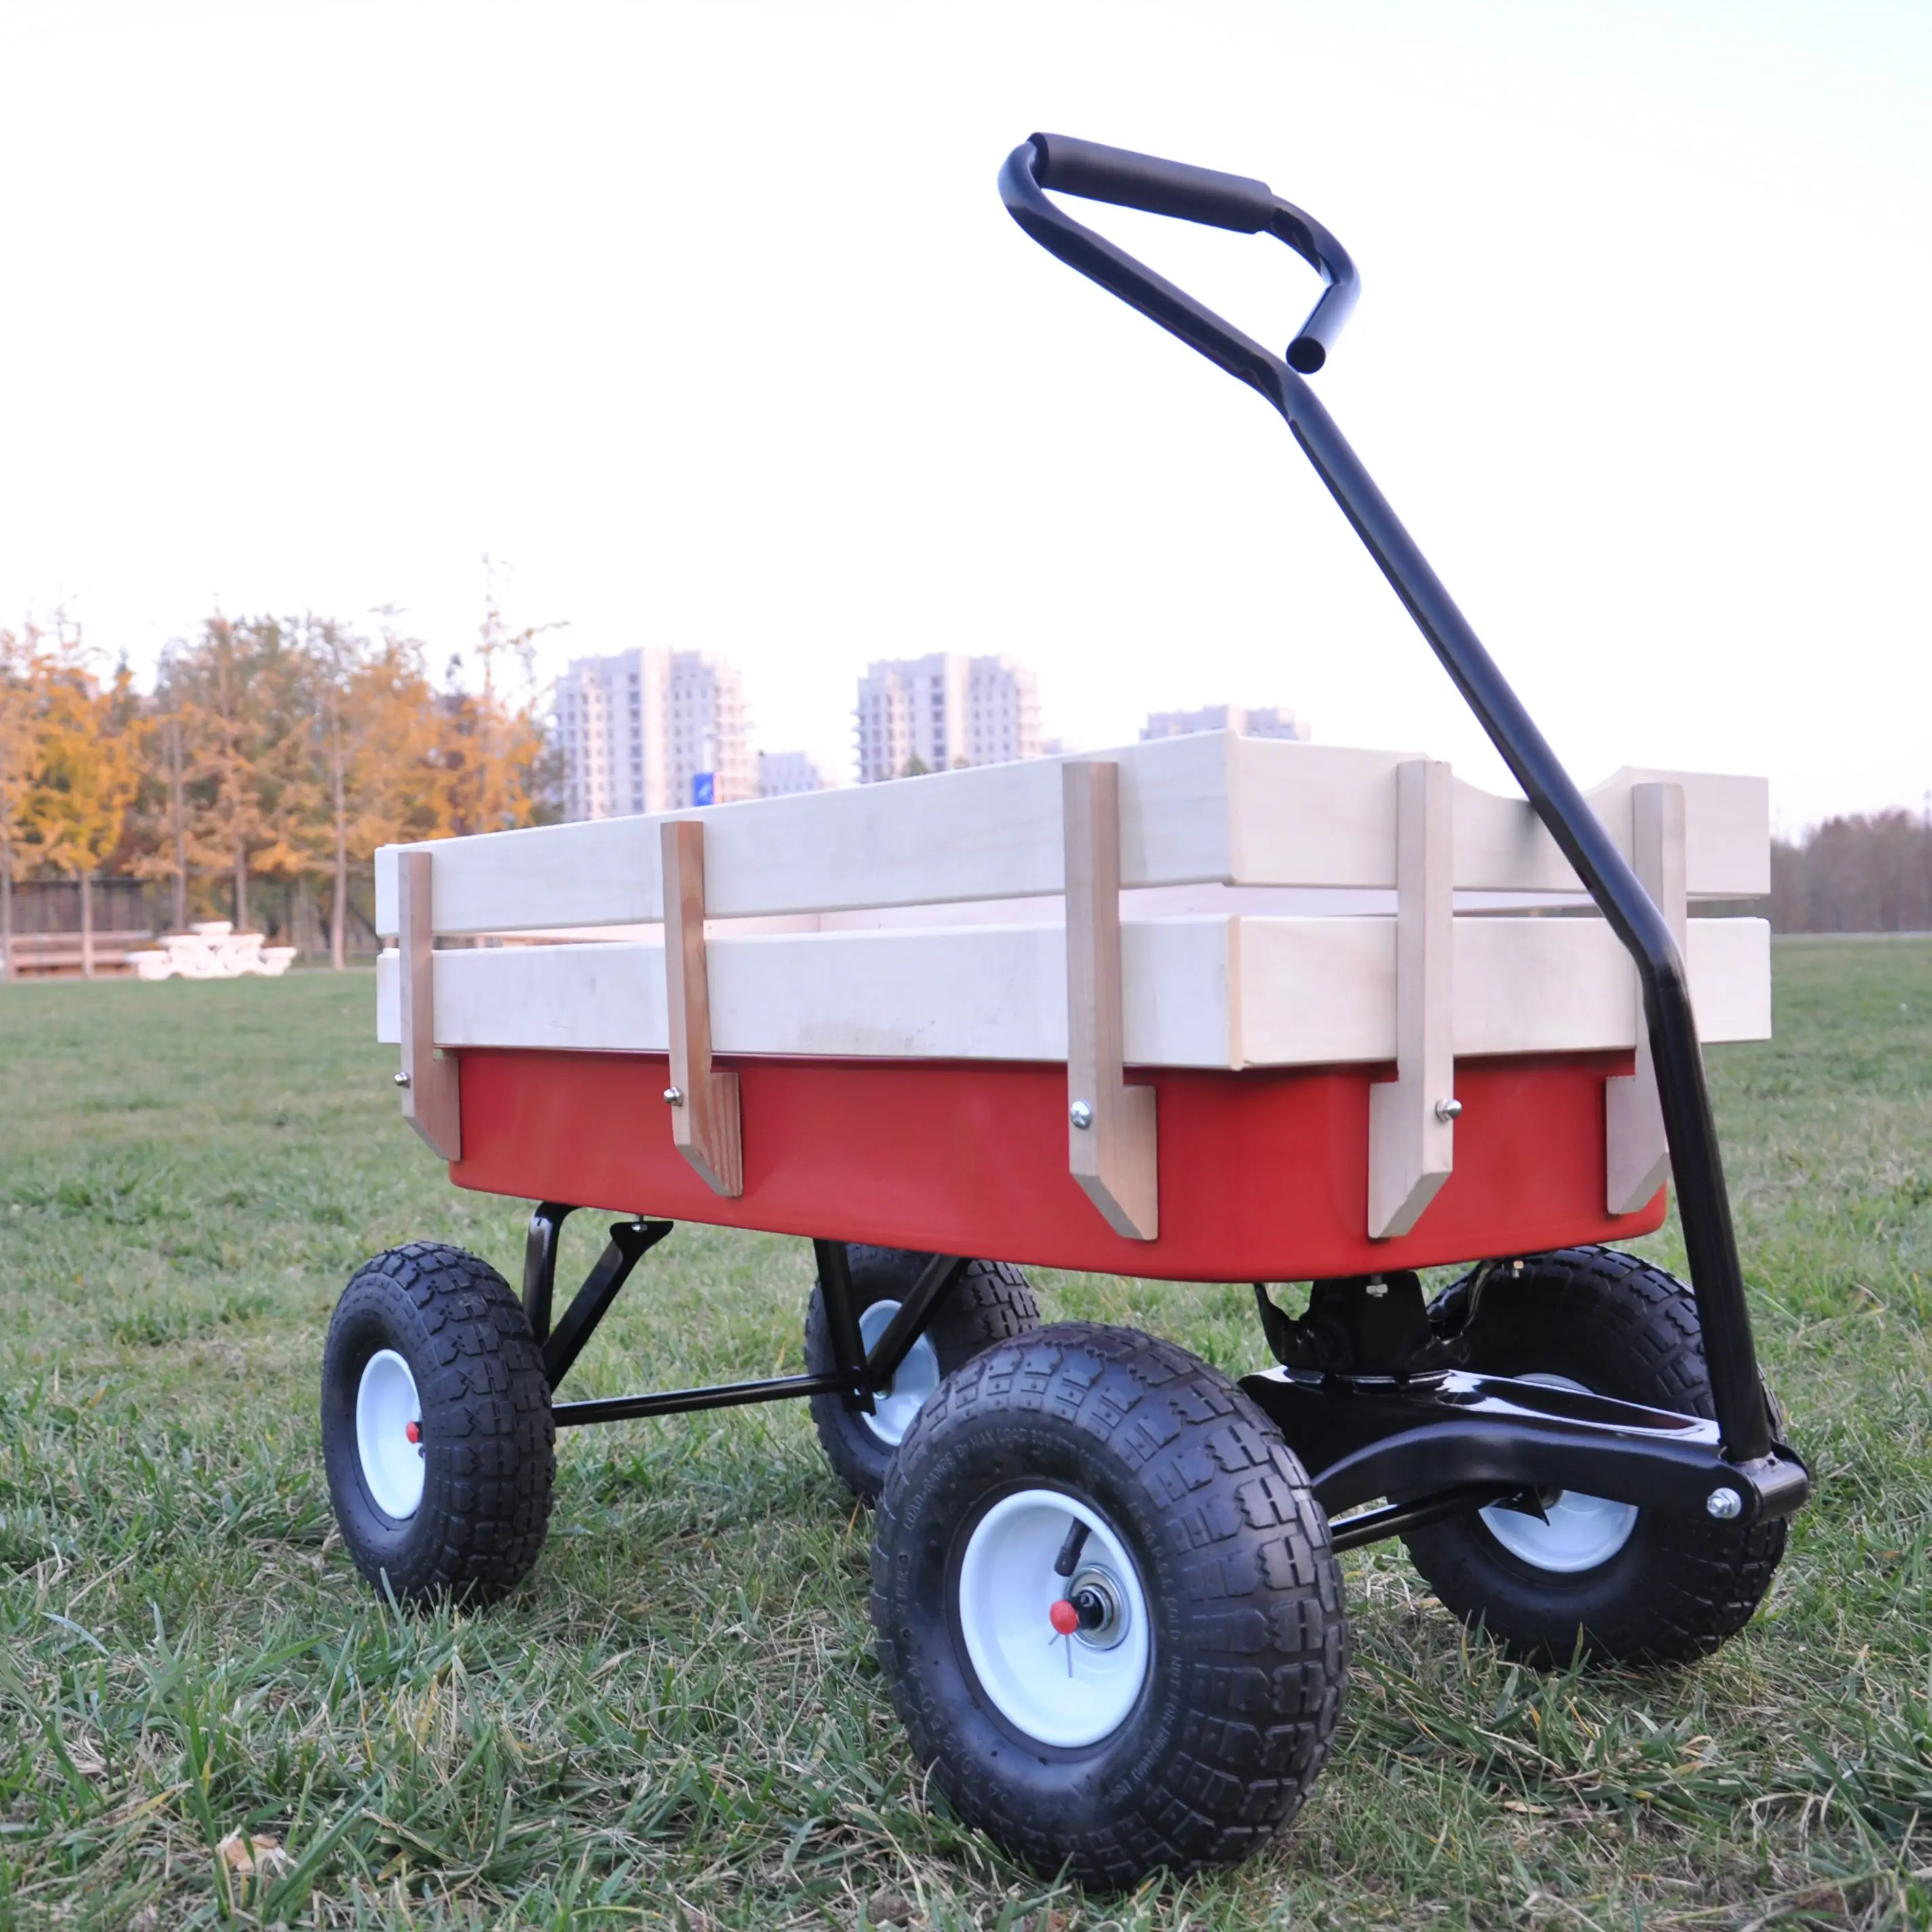 

Kids Camping Cart Outdoor Camping Cart Outdoor Utility Wagon Park Picnic Wagon All Terrain Pulling Wood Railing Air Tires Gift